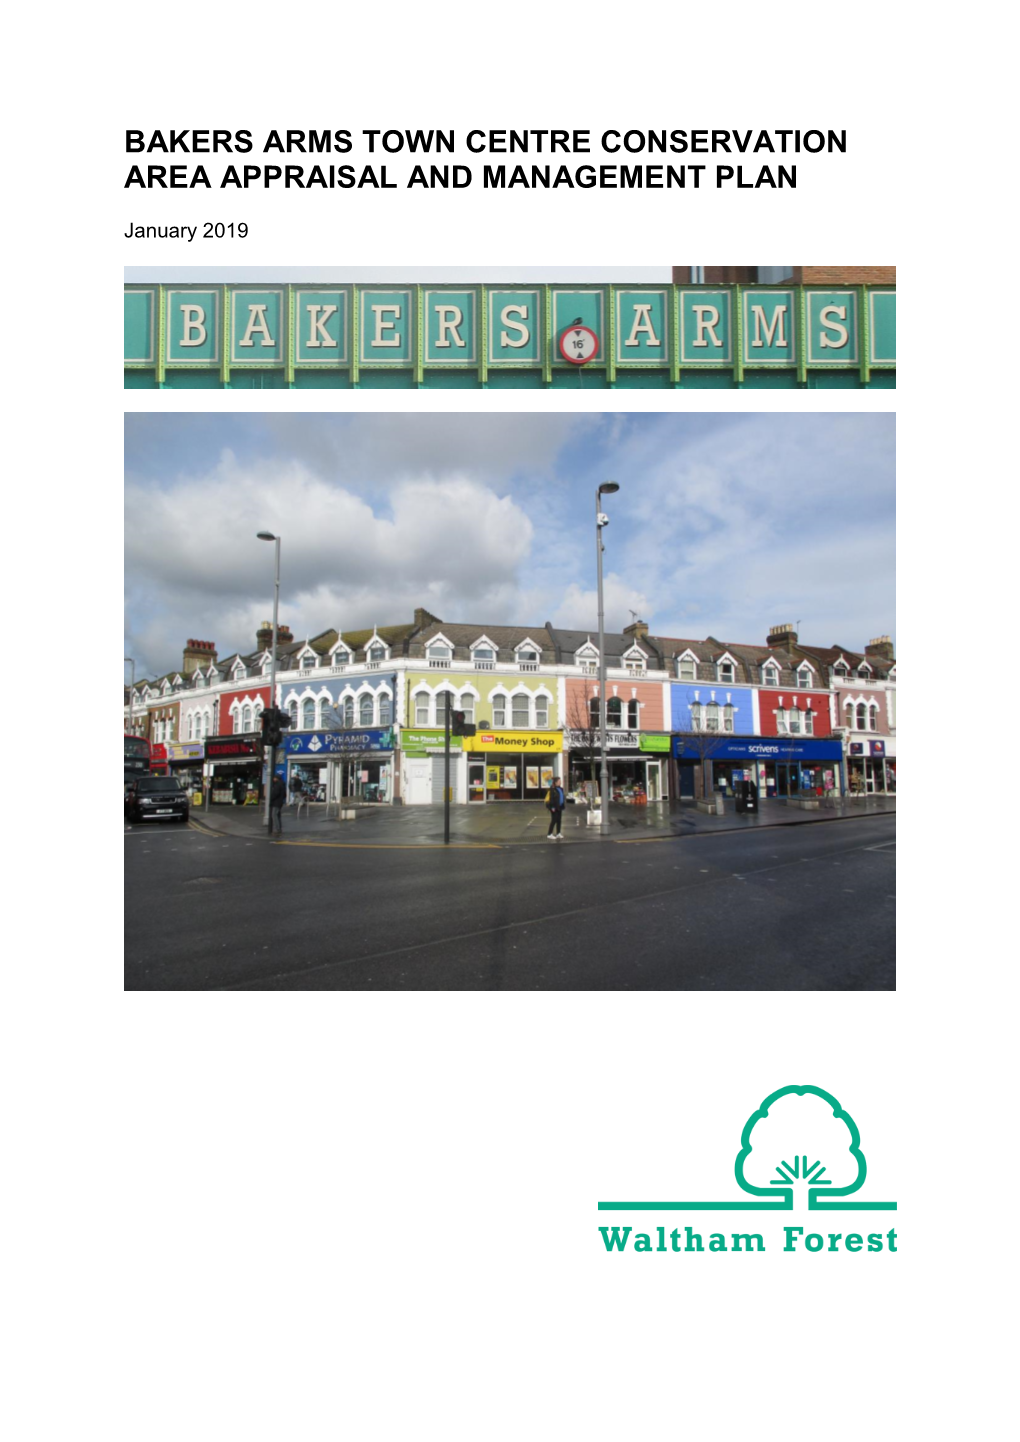 Bakers Arms Town Centre Conservation Area Appraisal and Management Plan